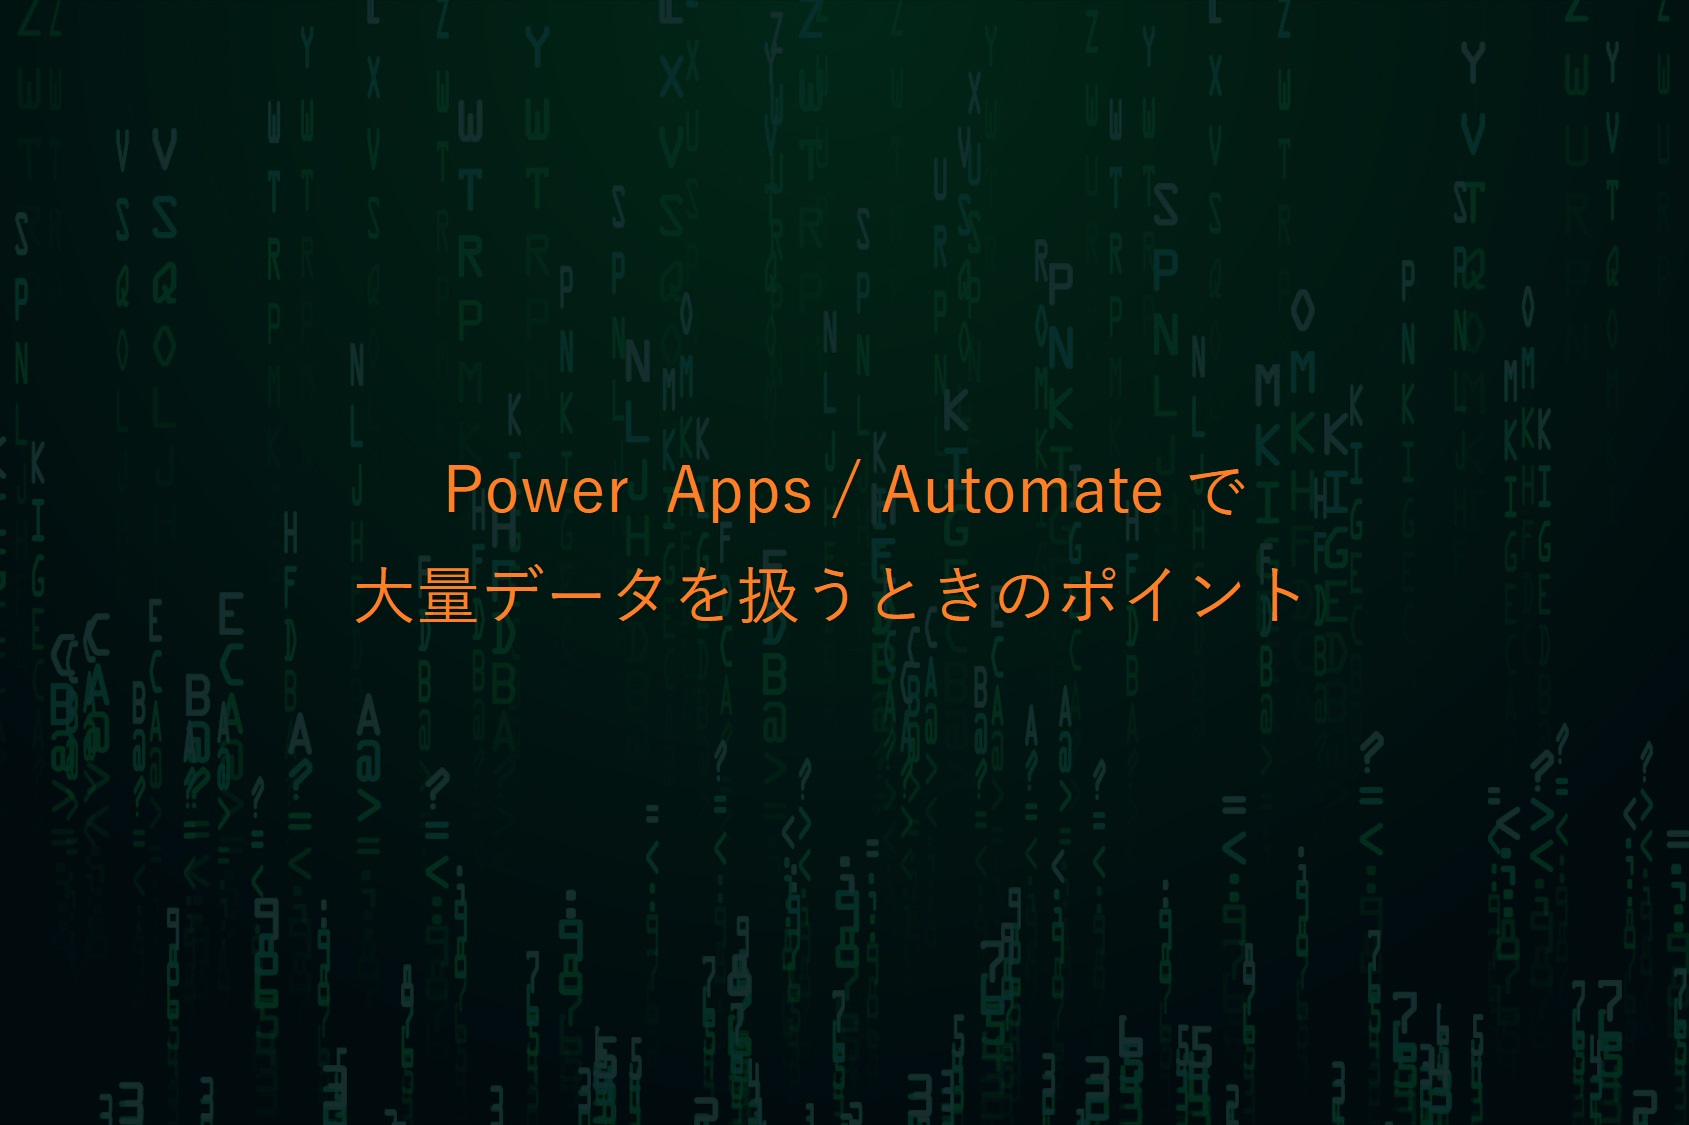 Power Apps / Power Automate で大量データを扱うときのポイント（後編）